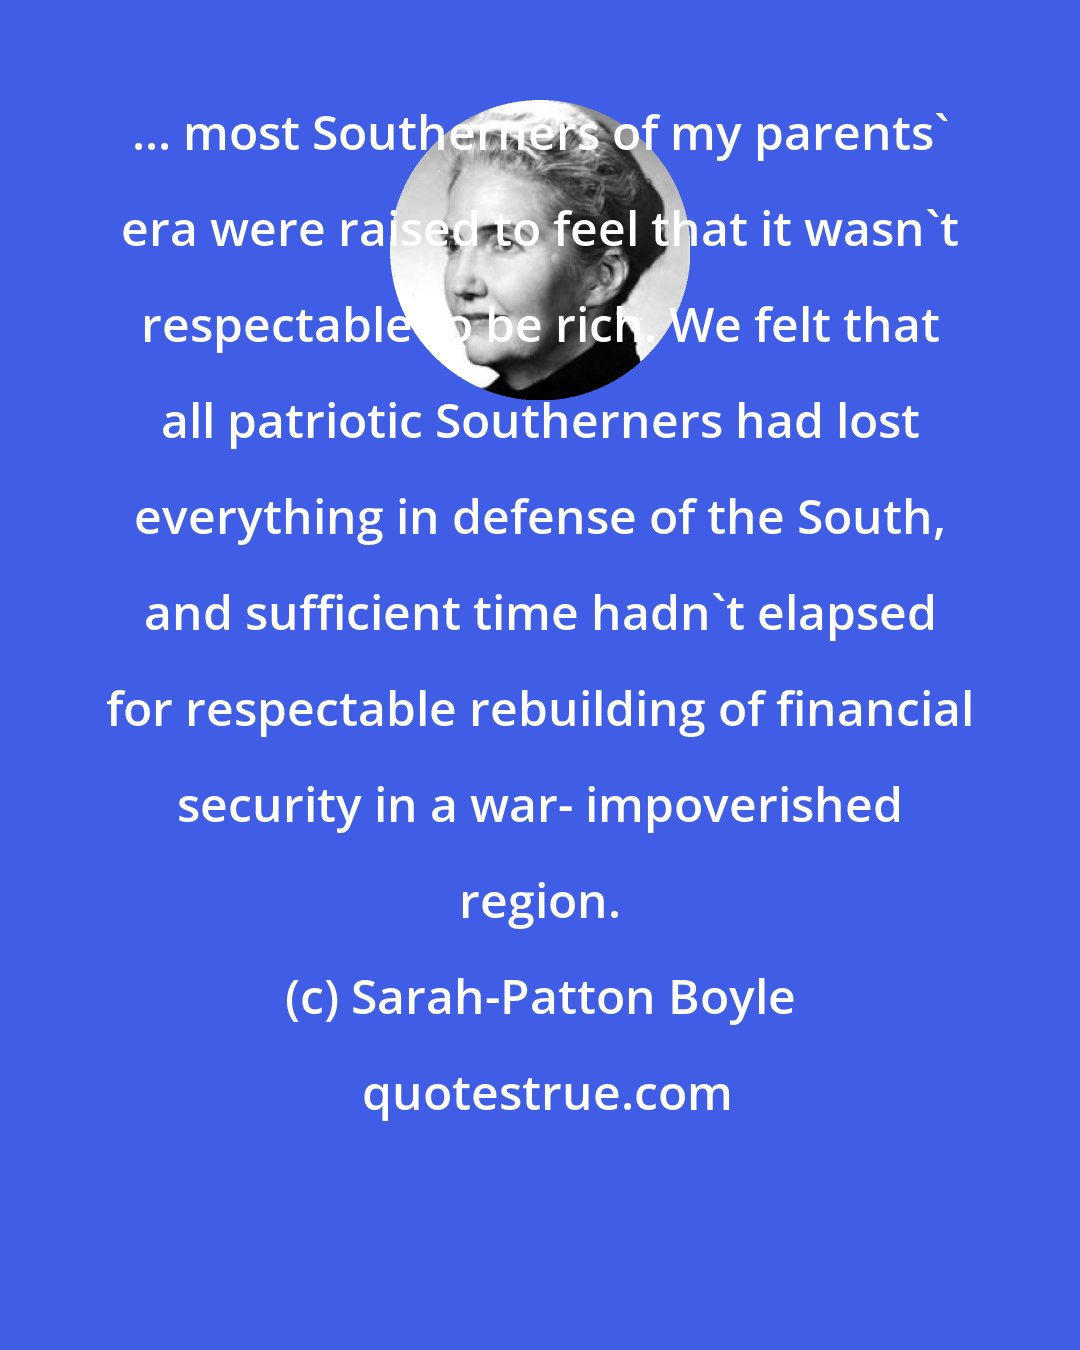 Sarah-Patton Boyle: ... most Southerners of my parents' era were raised to feel that it wasn't respectable to be rich. We felt that all patriotic Southerners had lost everything in defense of the South, and sufficient time hadn't elapsed for respectable rebuilding of financial security in a war- impoverished region.